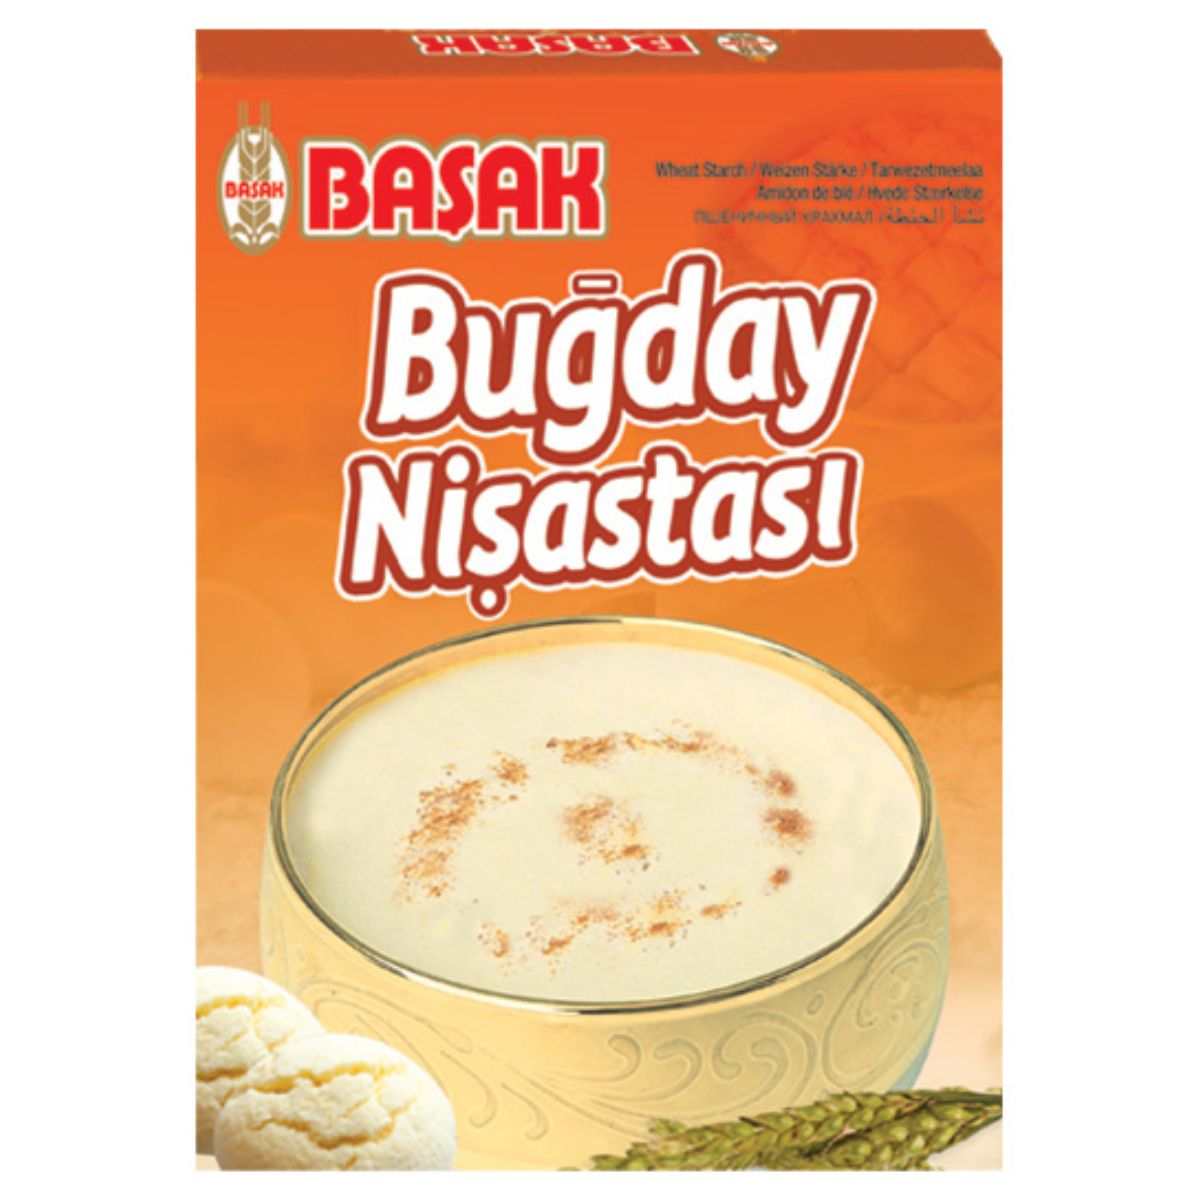 Package of Basak - Wheat Starch (Bugday Nisastasi) - 200g with an image of a pudding dusted with cinnamon.